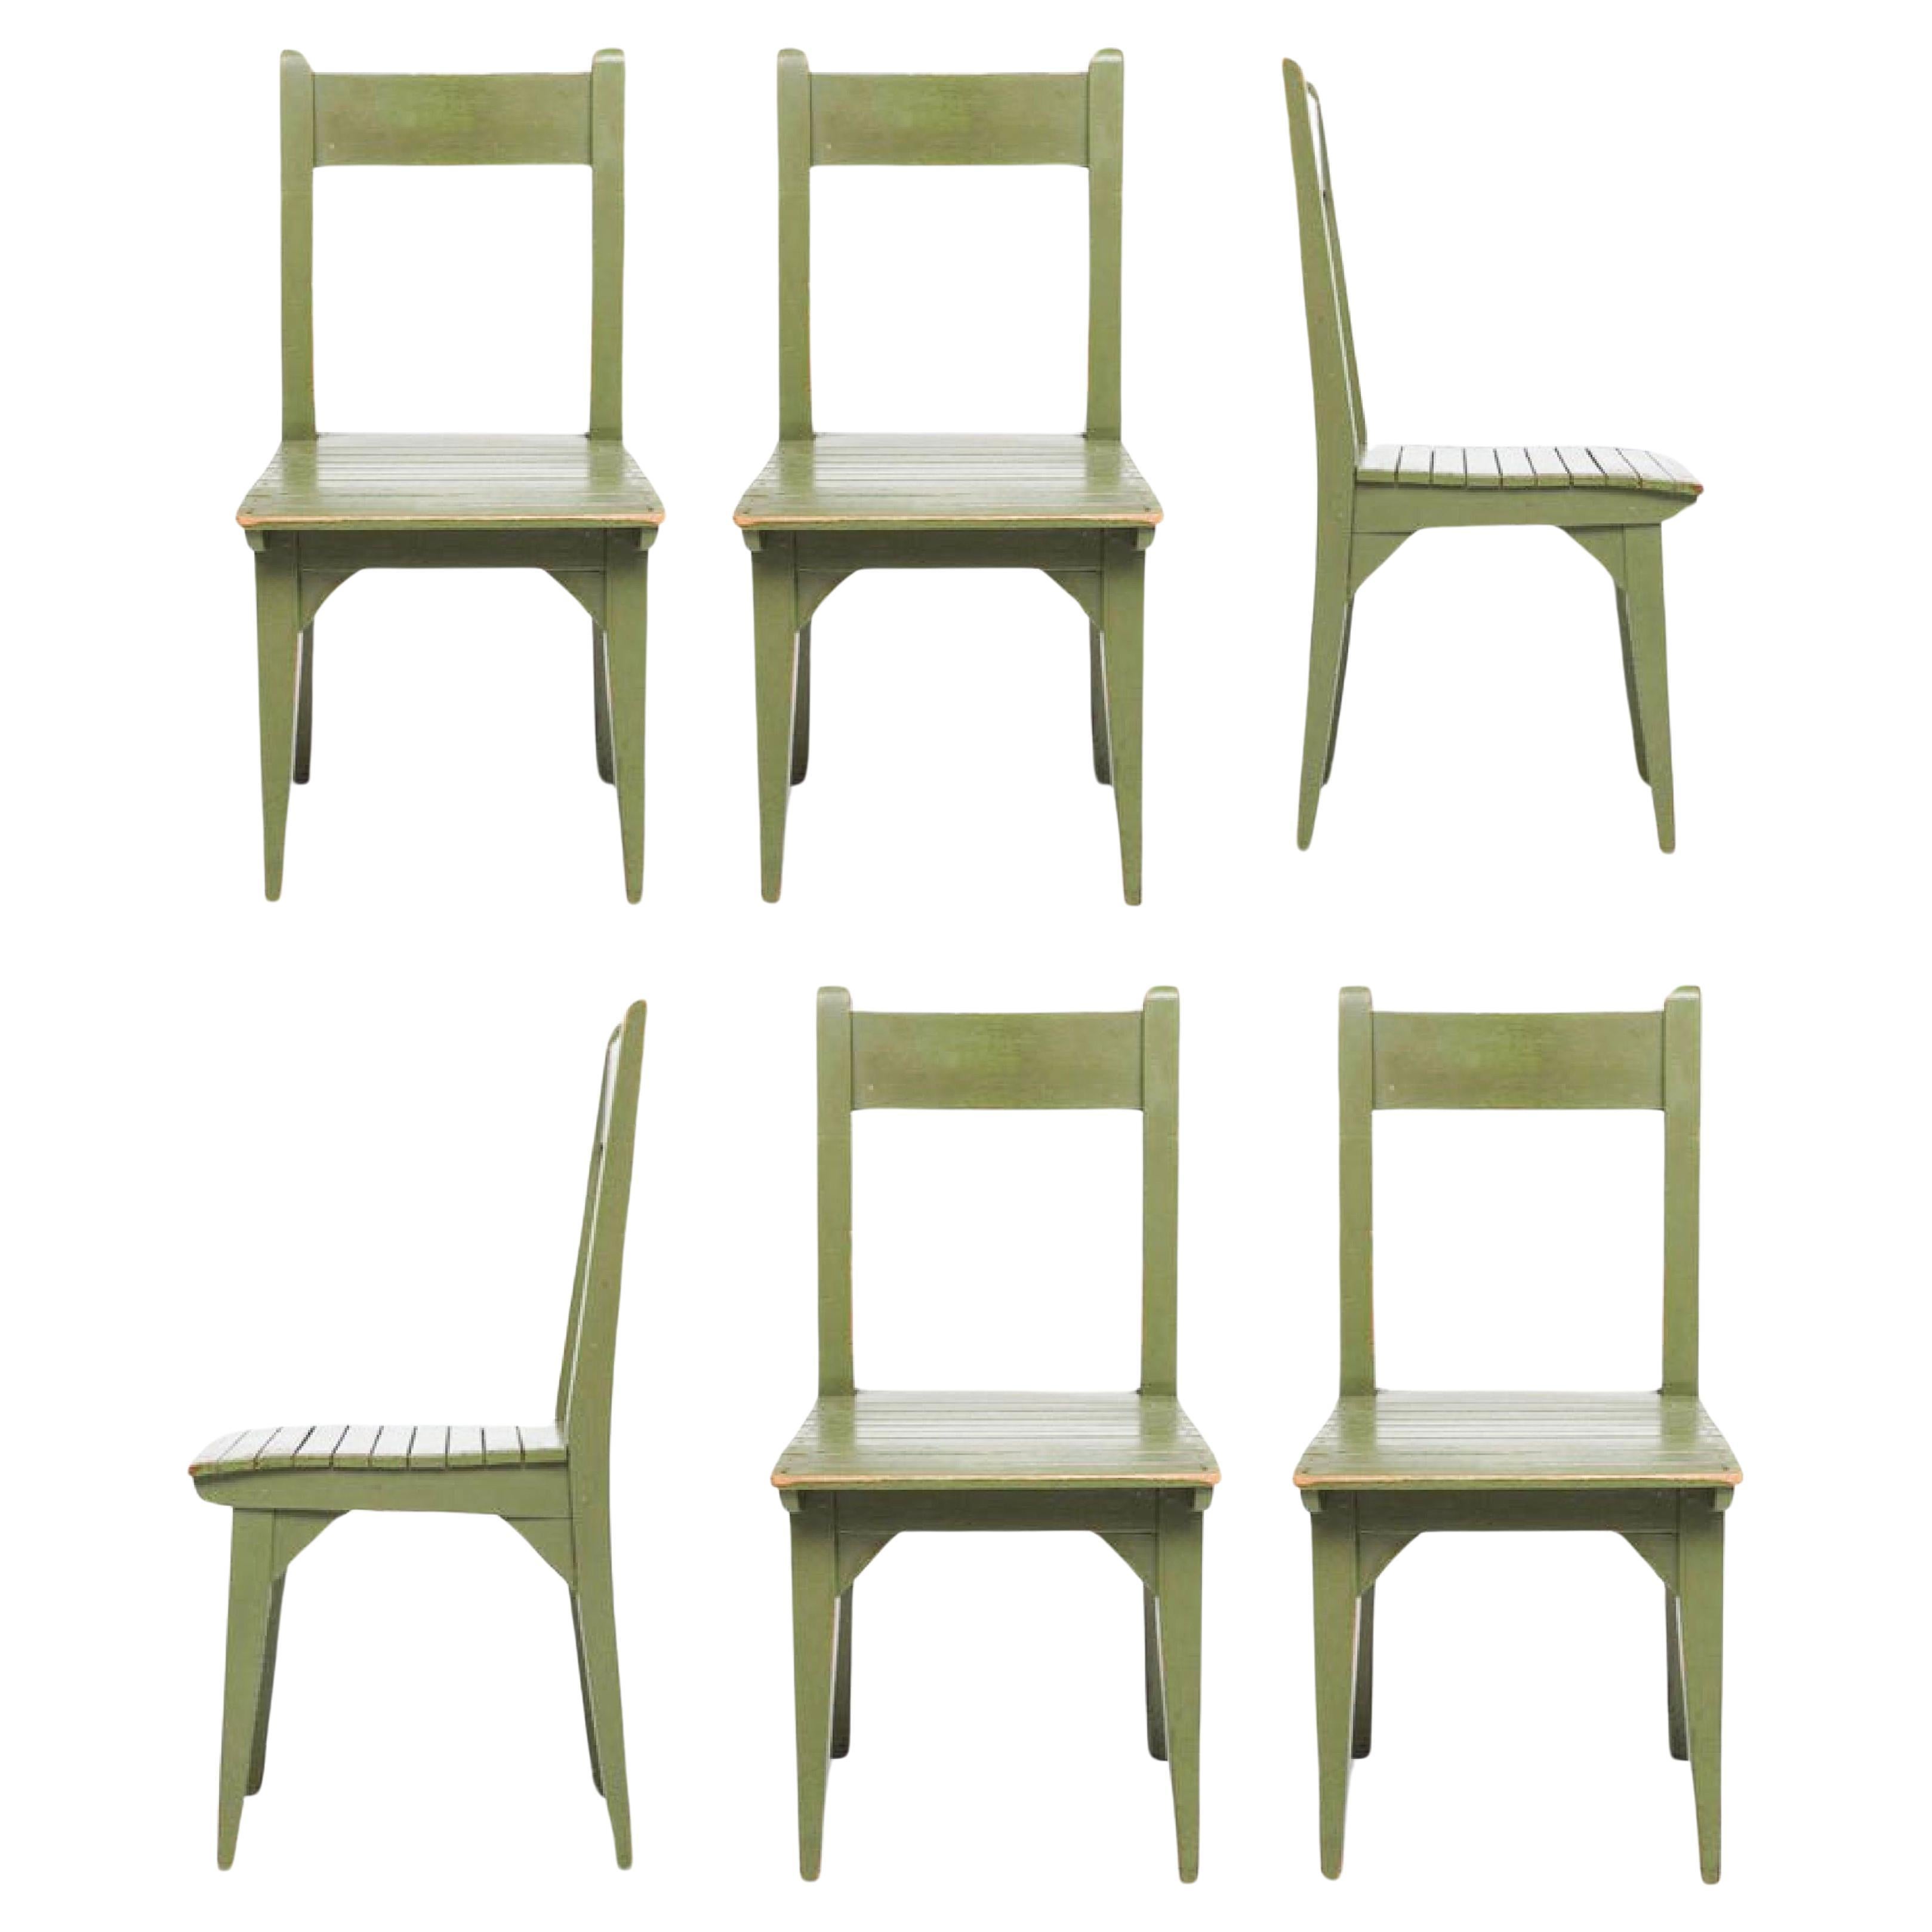 Roy McMakin Painted Wood Postmodern Dining Chair Set of 6, Green, 1982, USA. For Sale